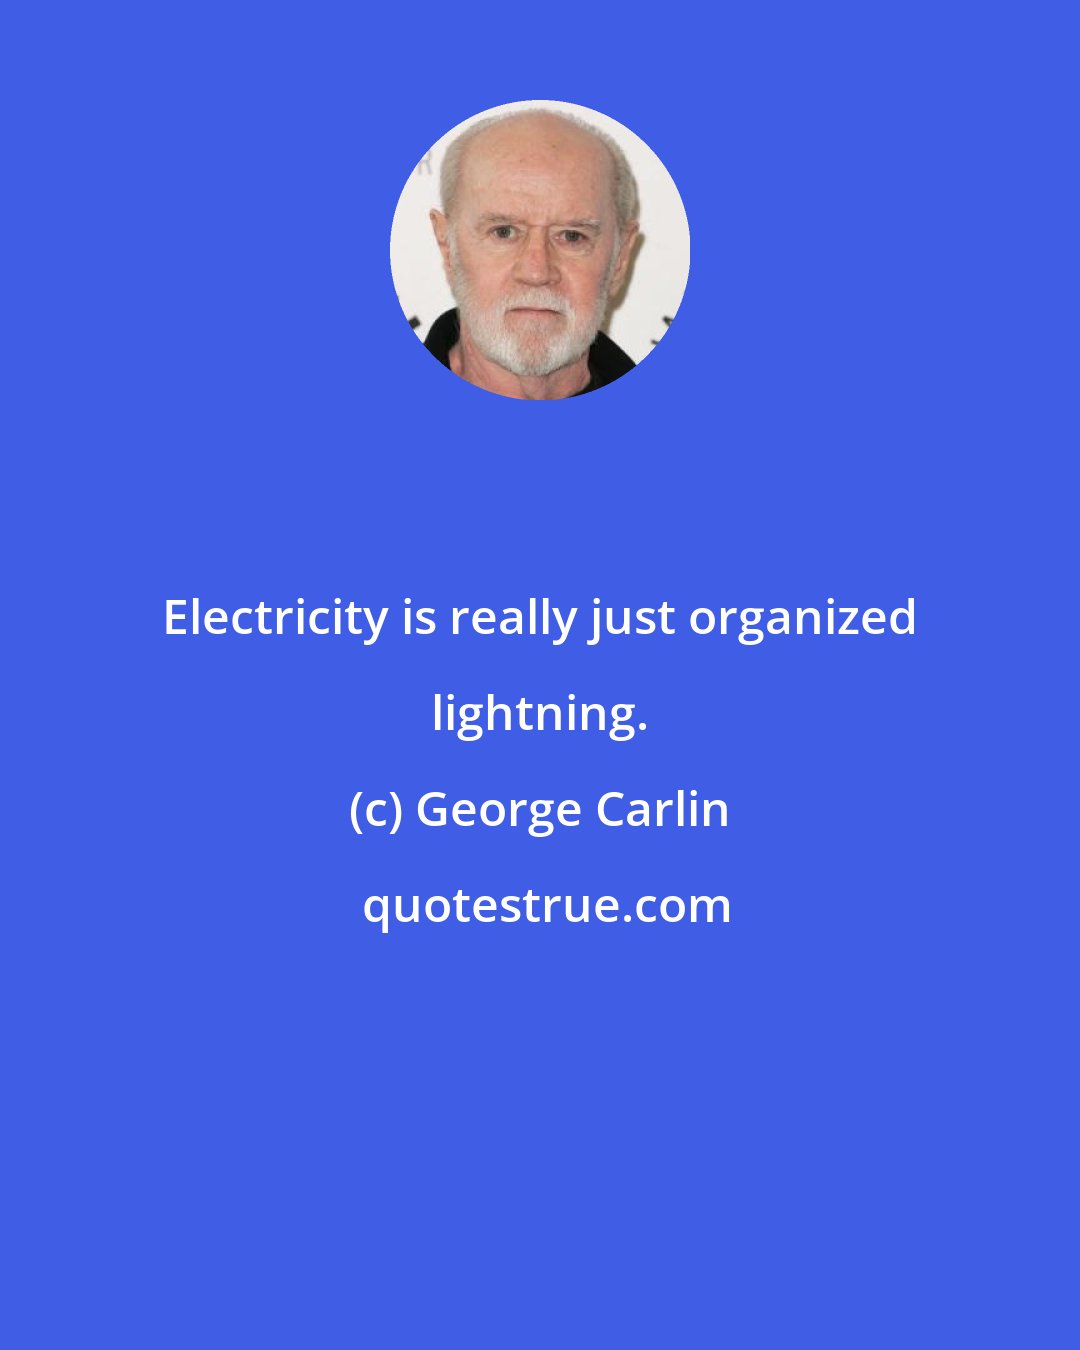 George Carlin: Electricity is really just organized lightning.